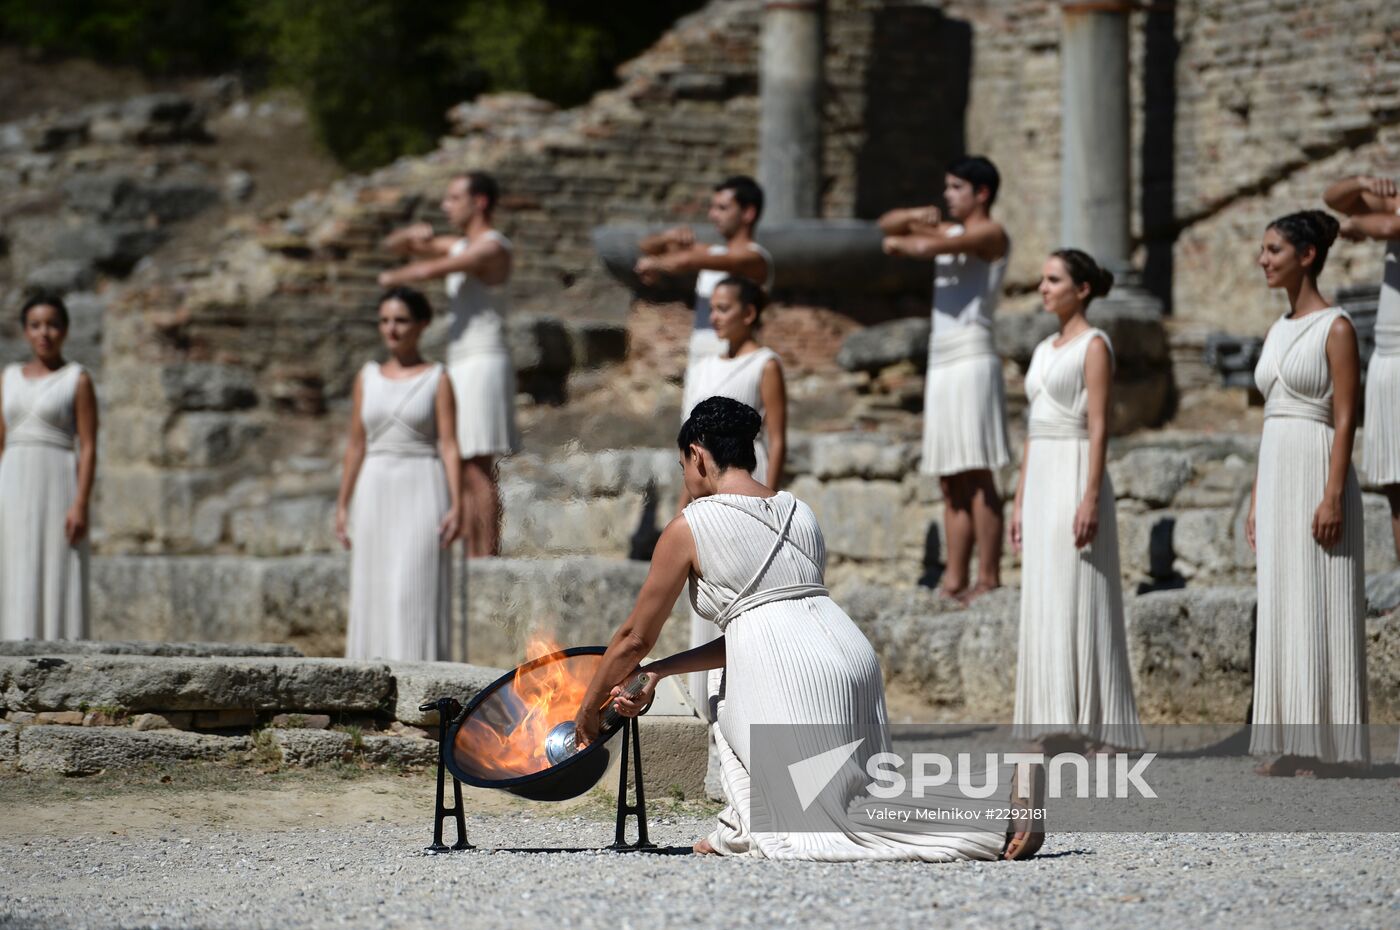 Ceremony lighting the Olympic flame